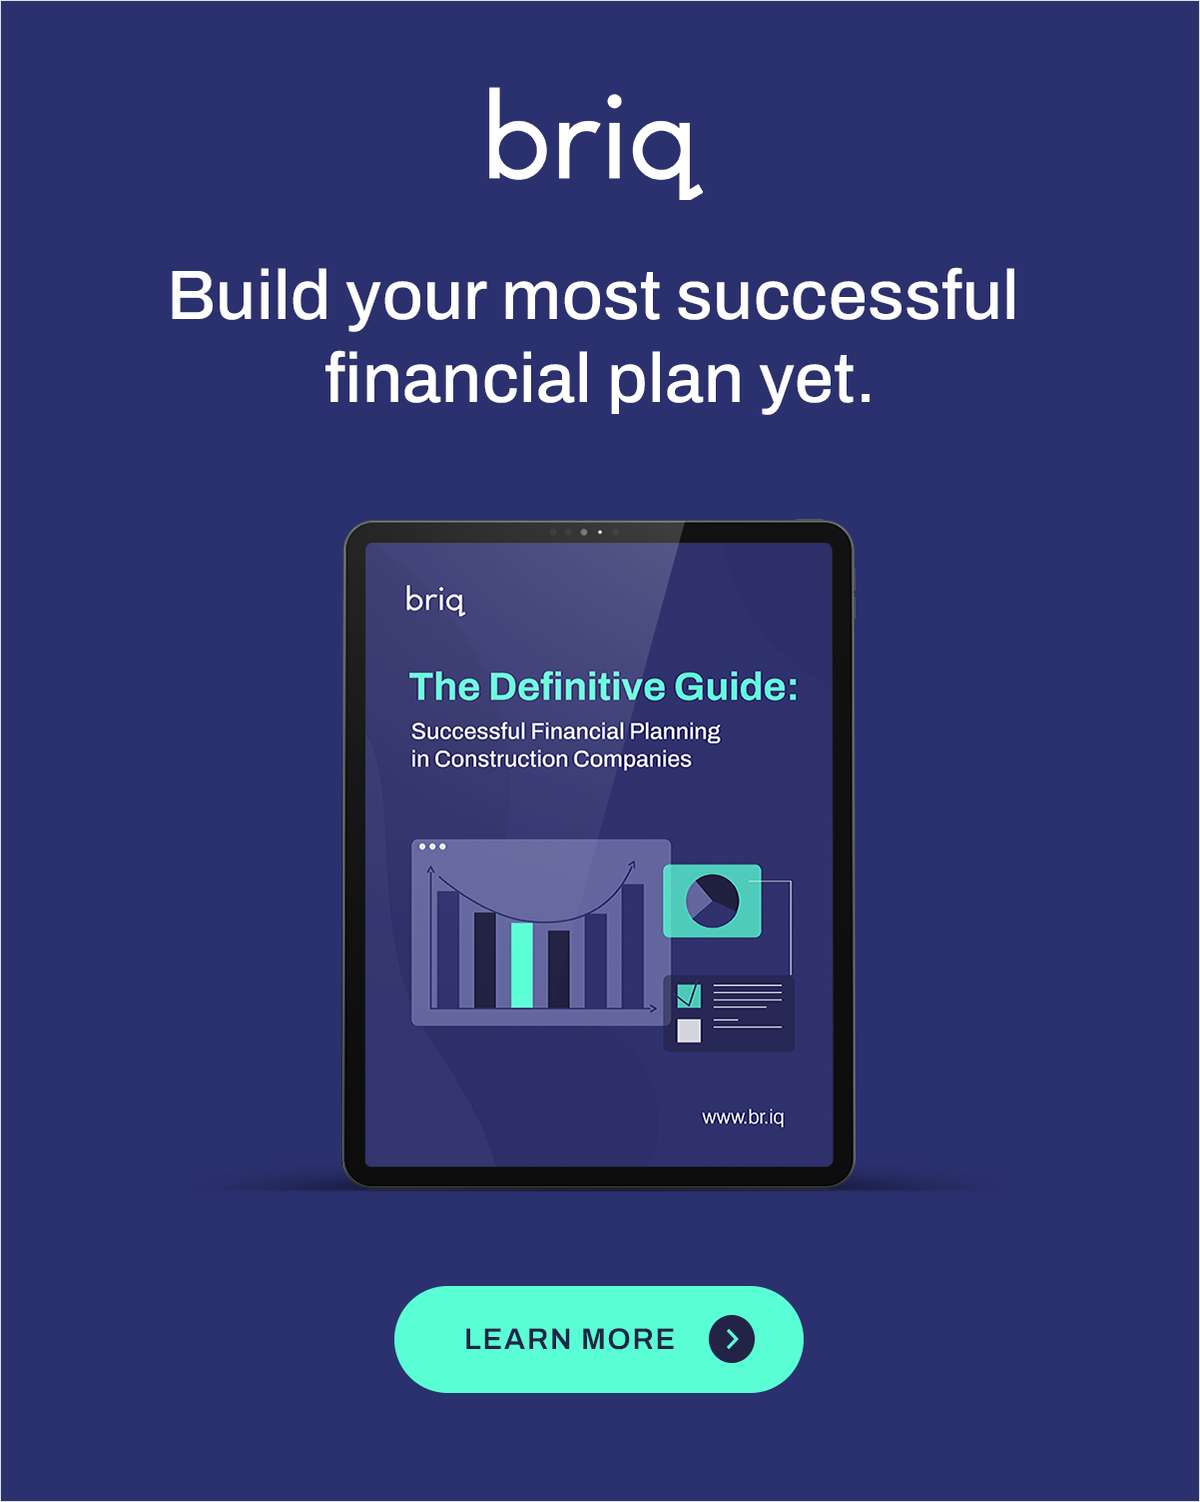 The Definitive Guide: Successful Financial Planning